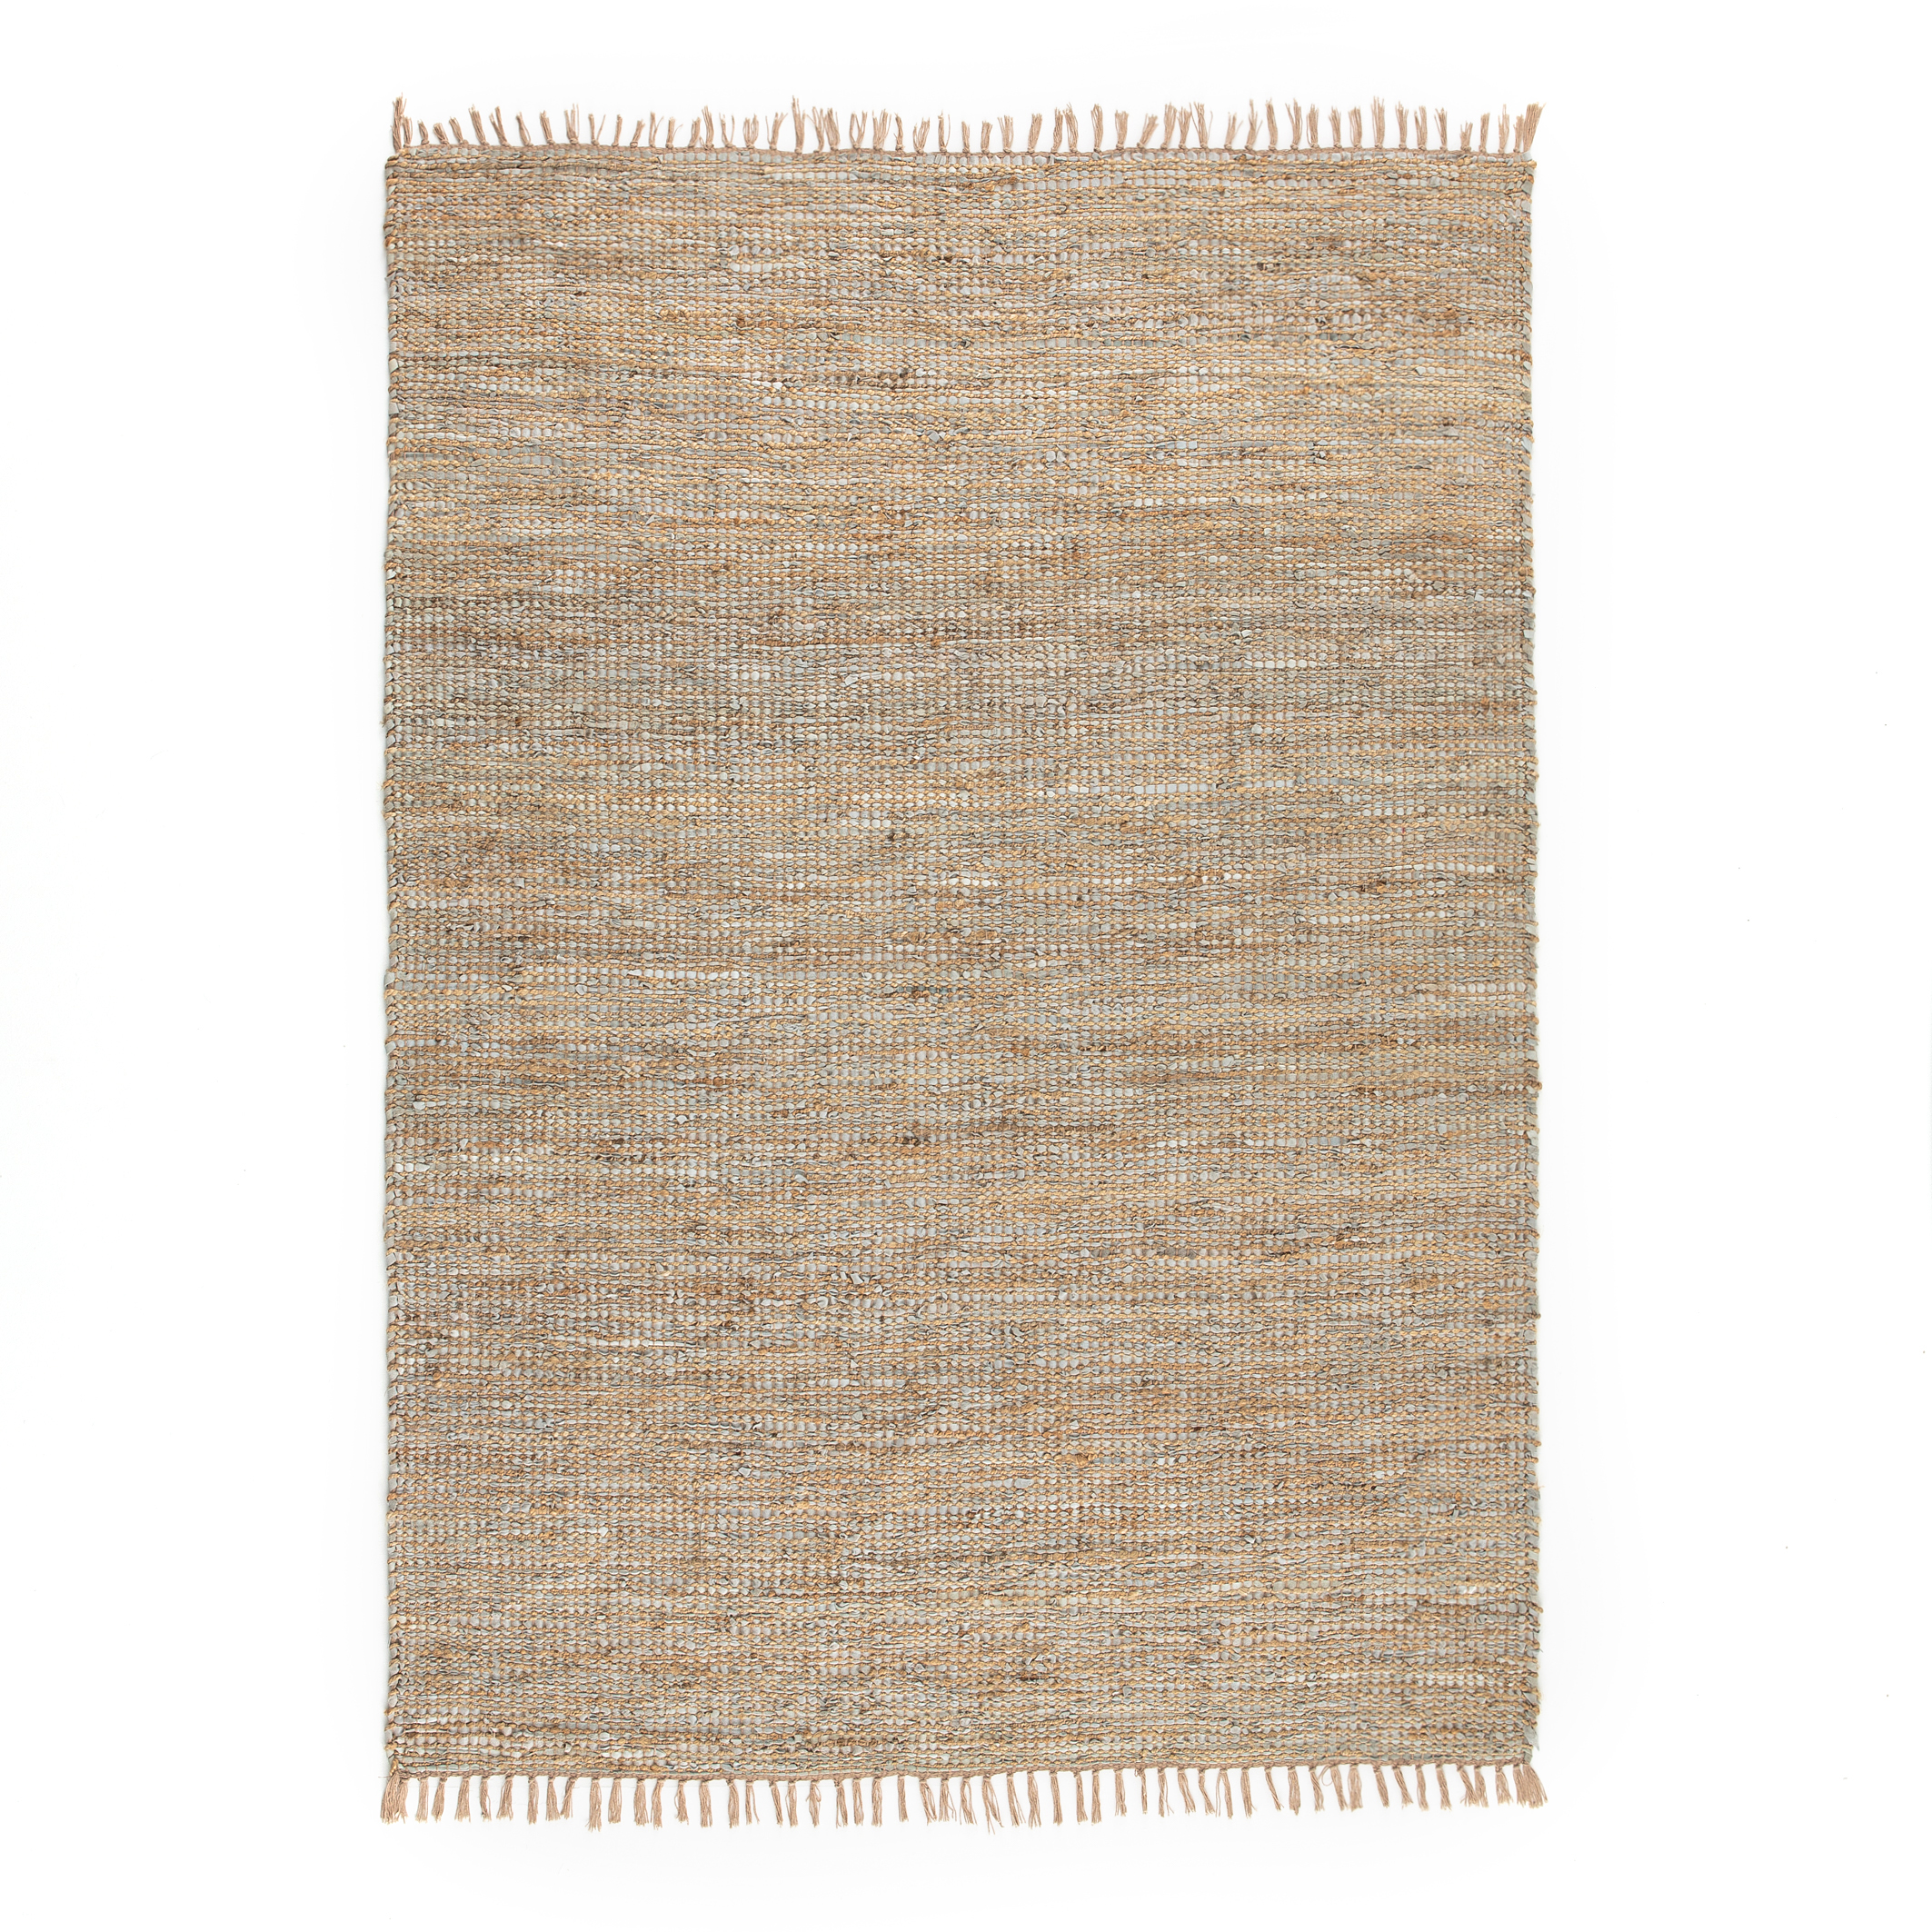 Aidas Jute Leather Hand Woven Rug, Leather Woven Rug